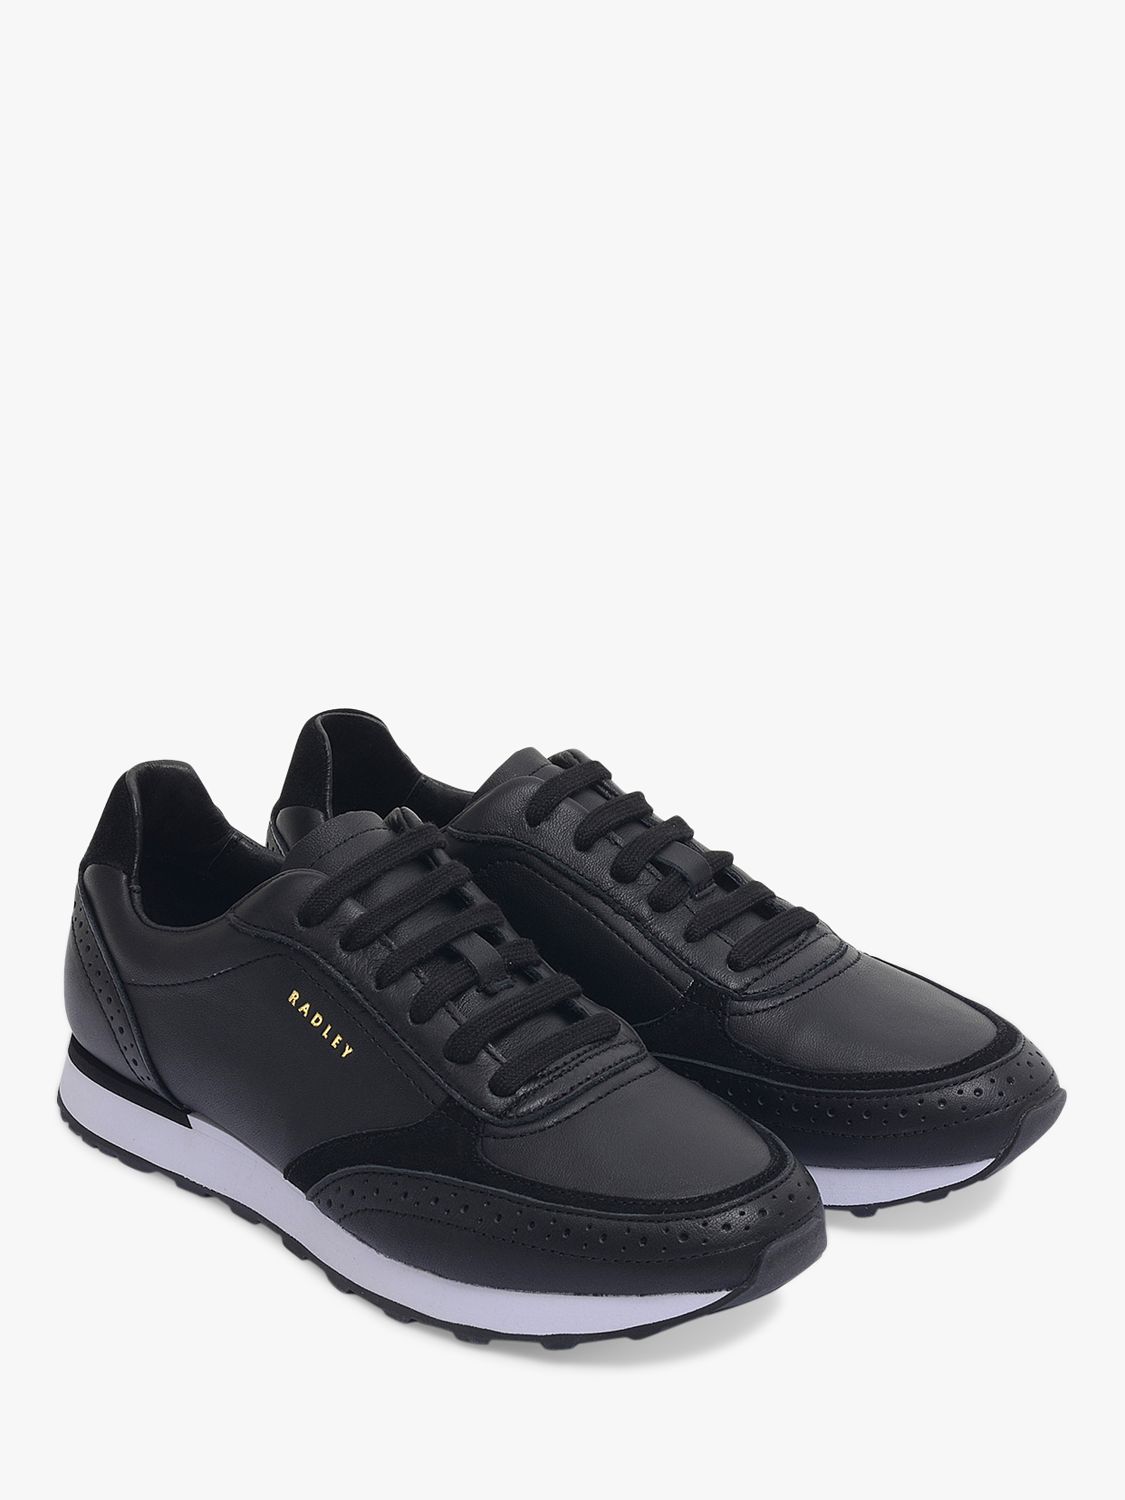 Radley Haven Leather Trainers, Black at John Lewis & Partners